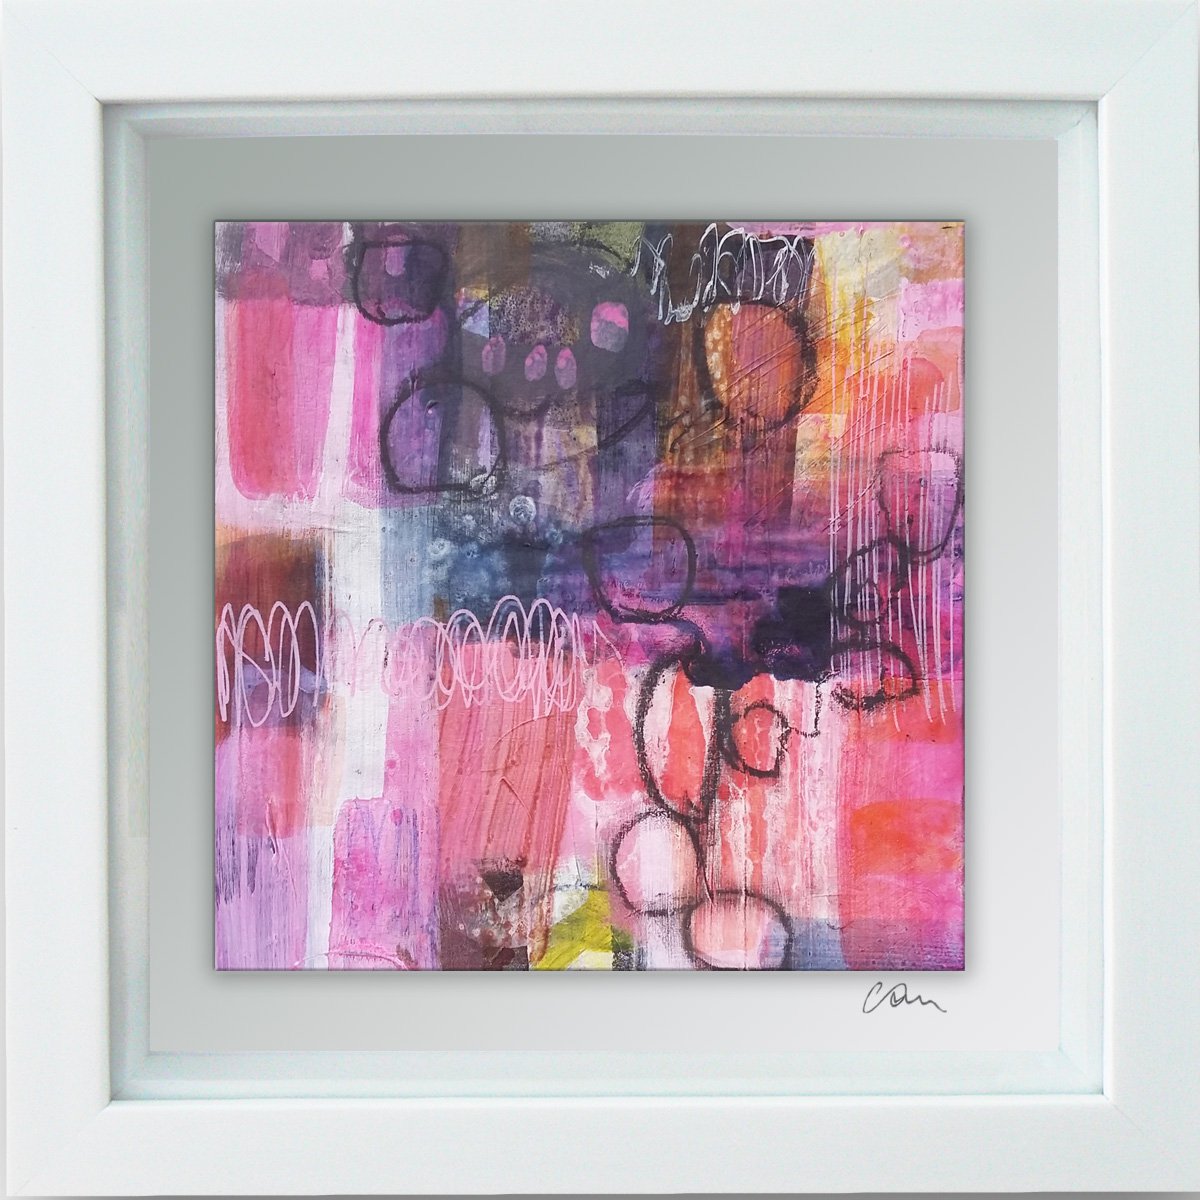 Framed ready to hang original abstract - Feedback #4 by Carolynne Coulson